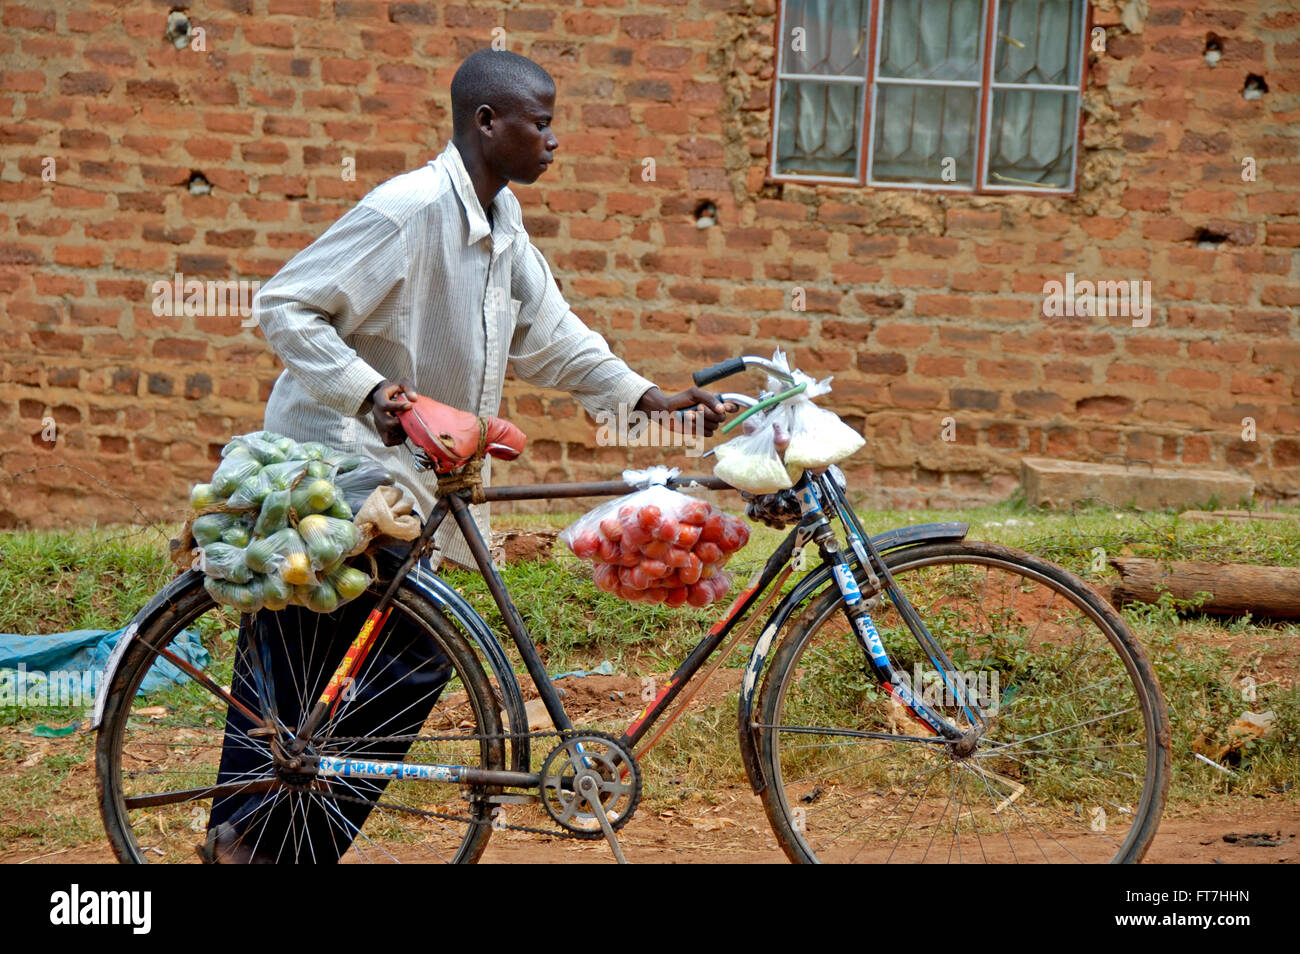 Kampala, Uganda-10 April 2007: Man with bike. He is carrying fruit and vegetables to bring home. Stock Photo